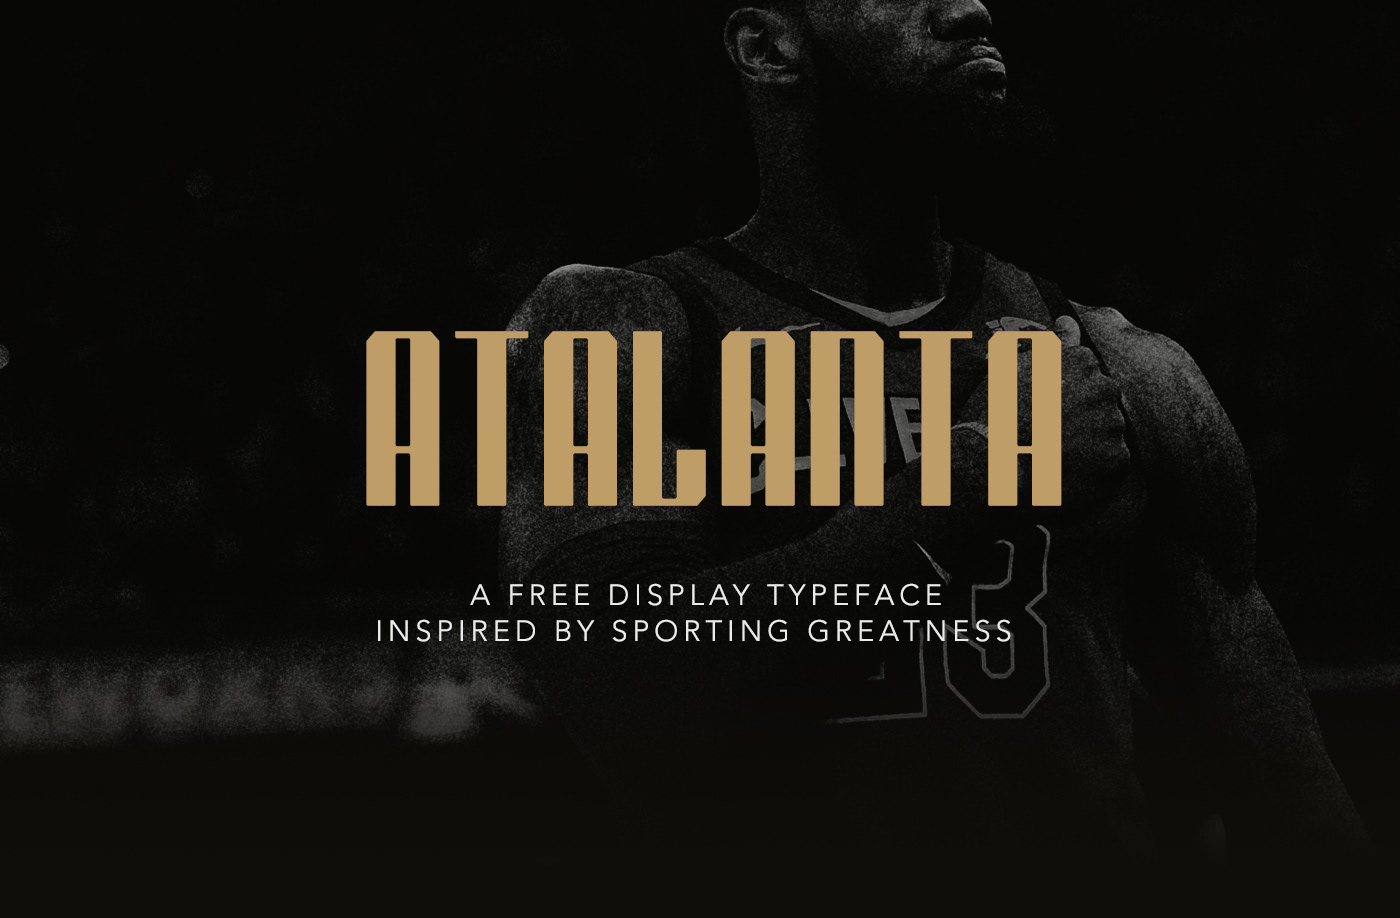 font free typography   Typeface download Free font type Display free typeface sports